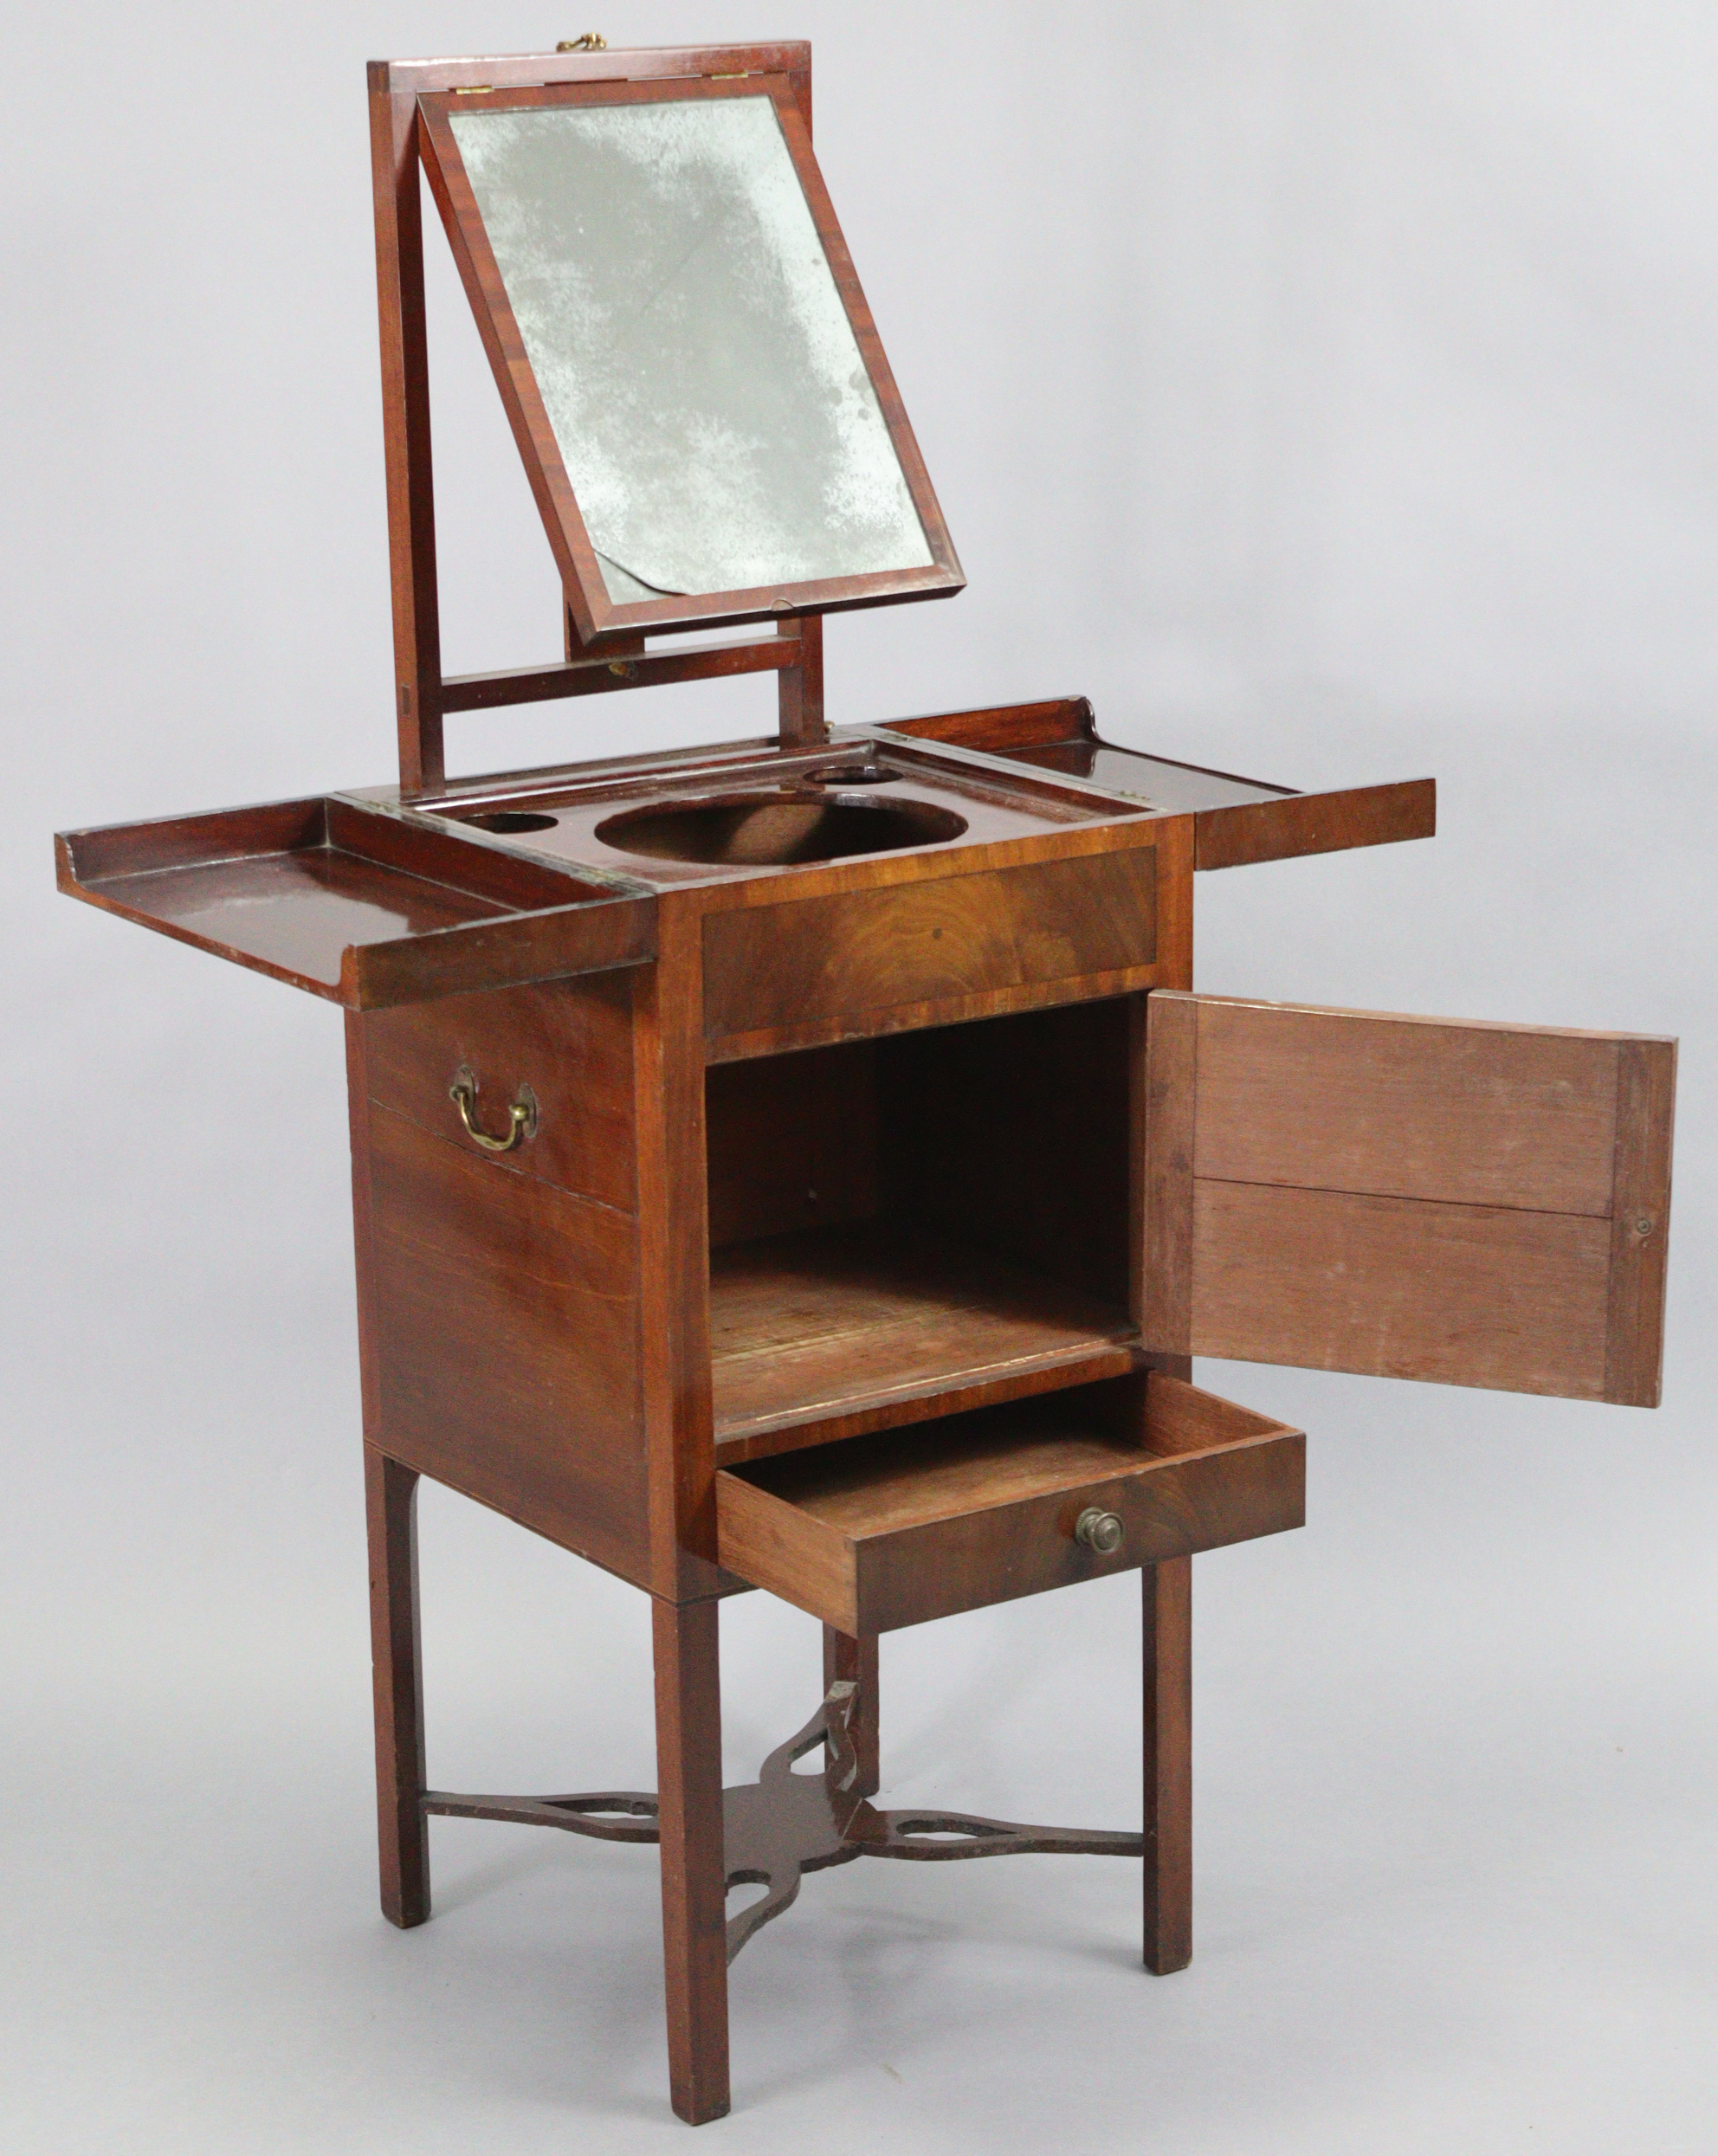 An early-mid 19th century mahogany washstand with envelope top, fitted with an adjustable rise-&-